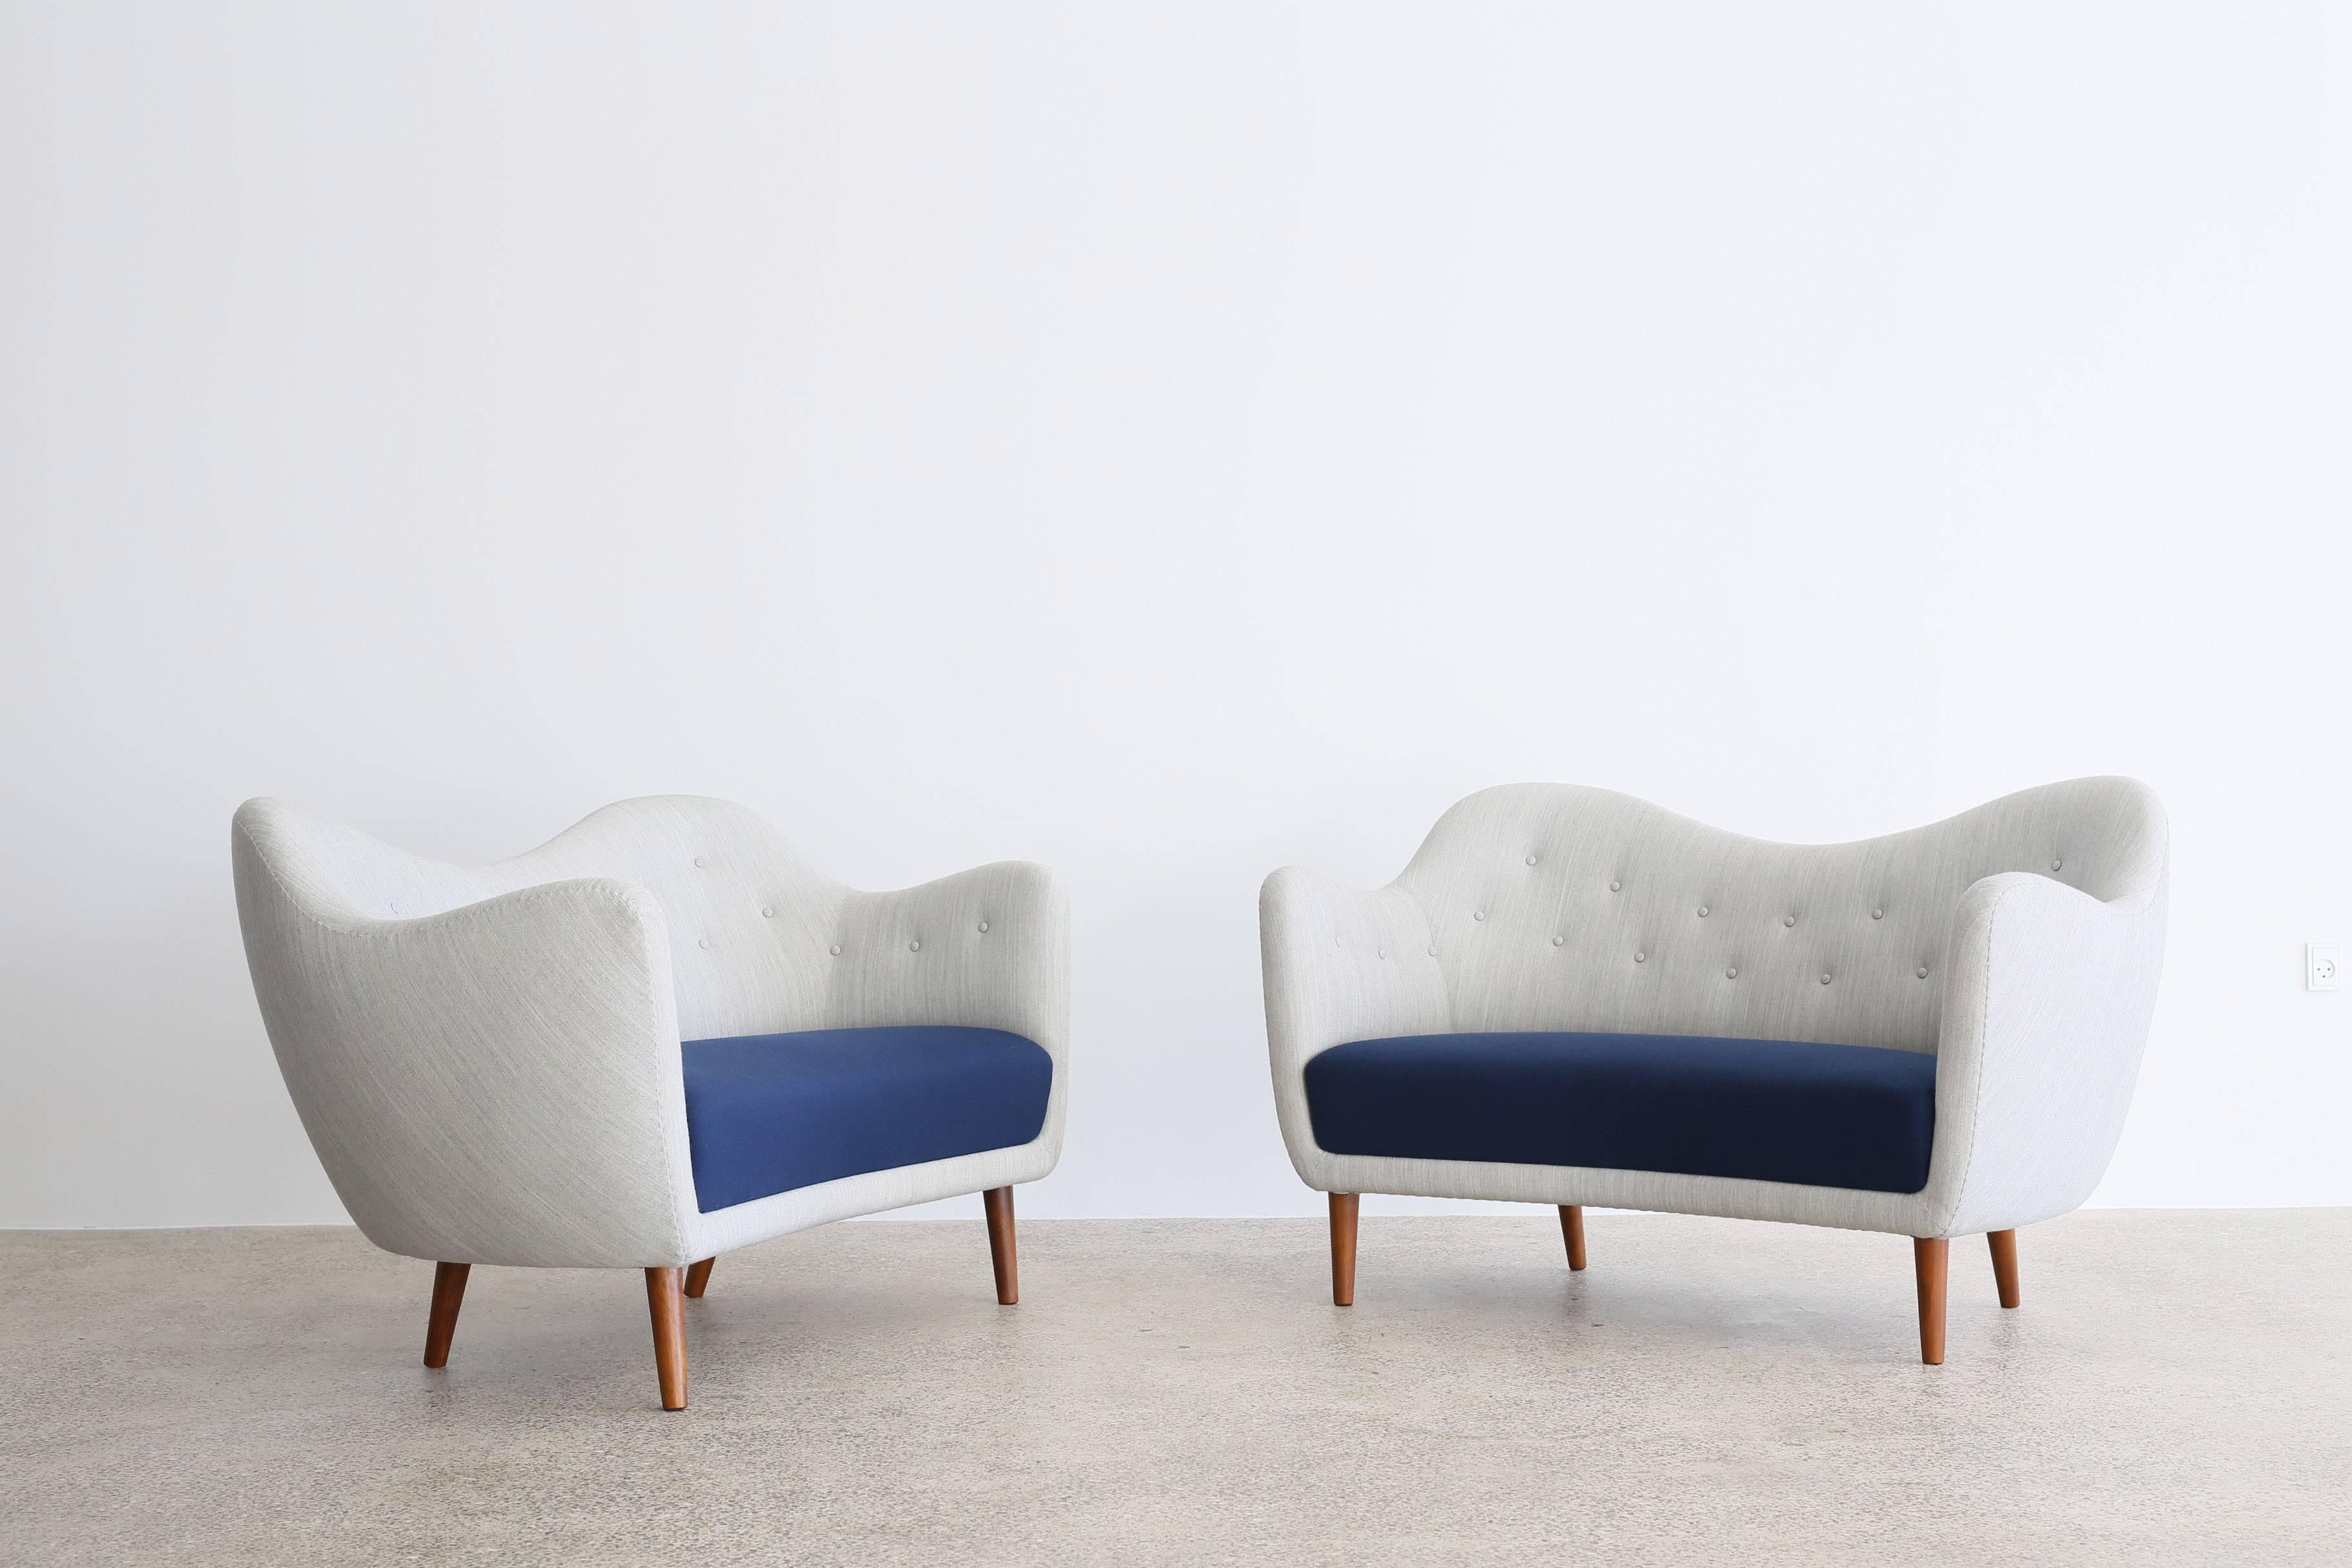 A pair of Finn Juhl sofas upholstered with fabric in grey and blue, tapering legs of stained wood. 
Designed by Finn Juhl, 1946 and manufactured by Bovirke, Denmark, model BO46.

Available as a pair, sold and priced individually. 

For additional